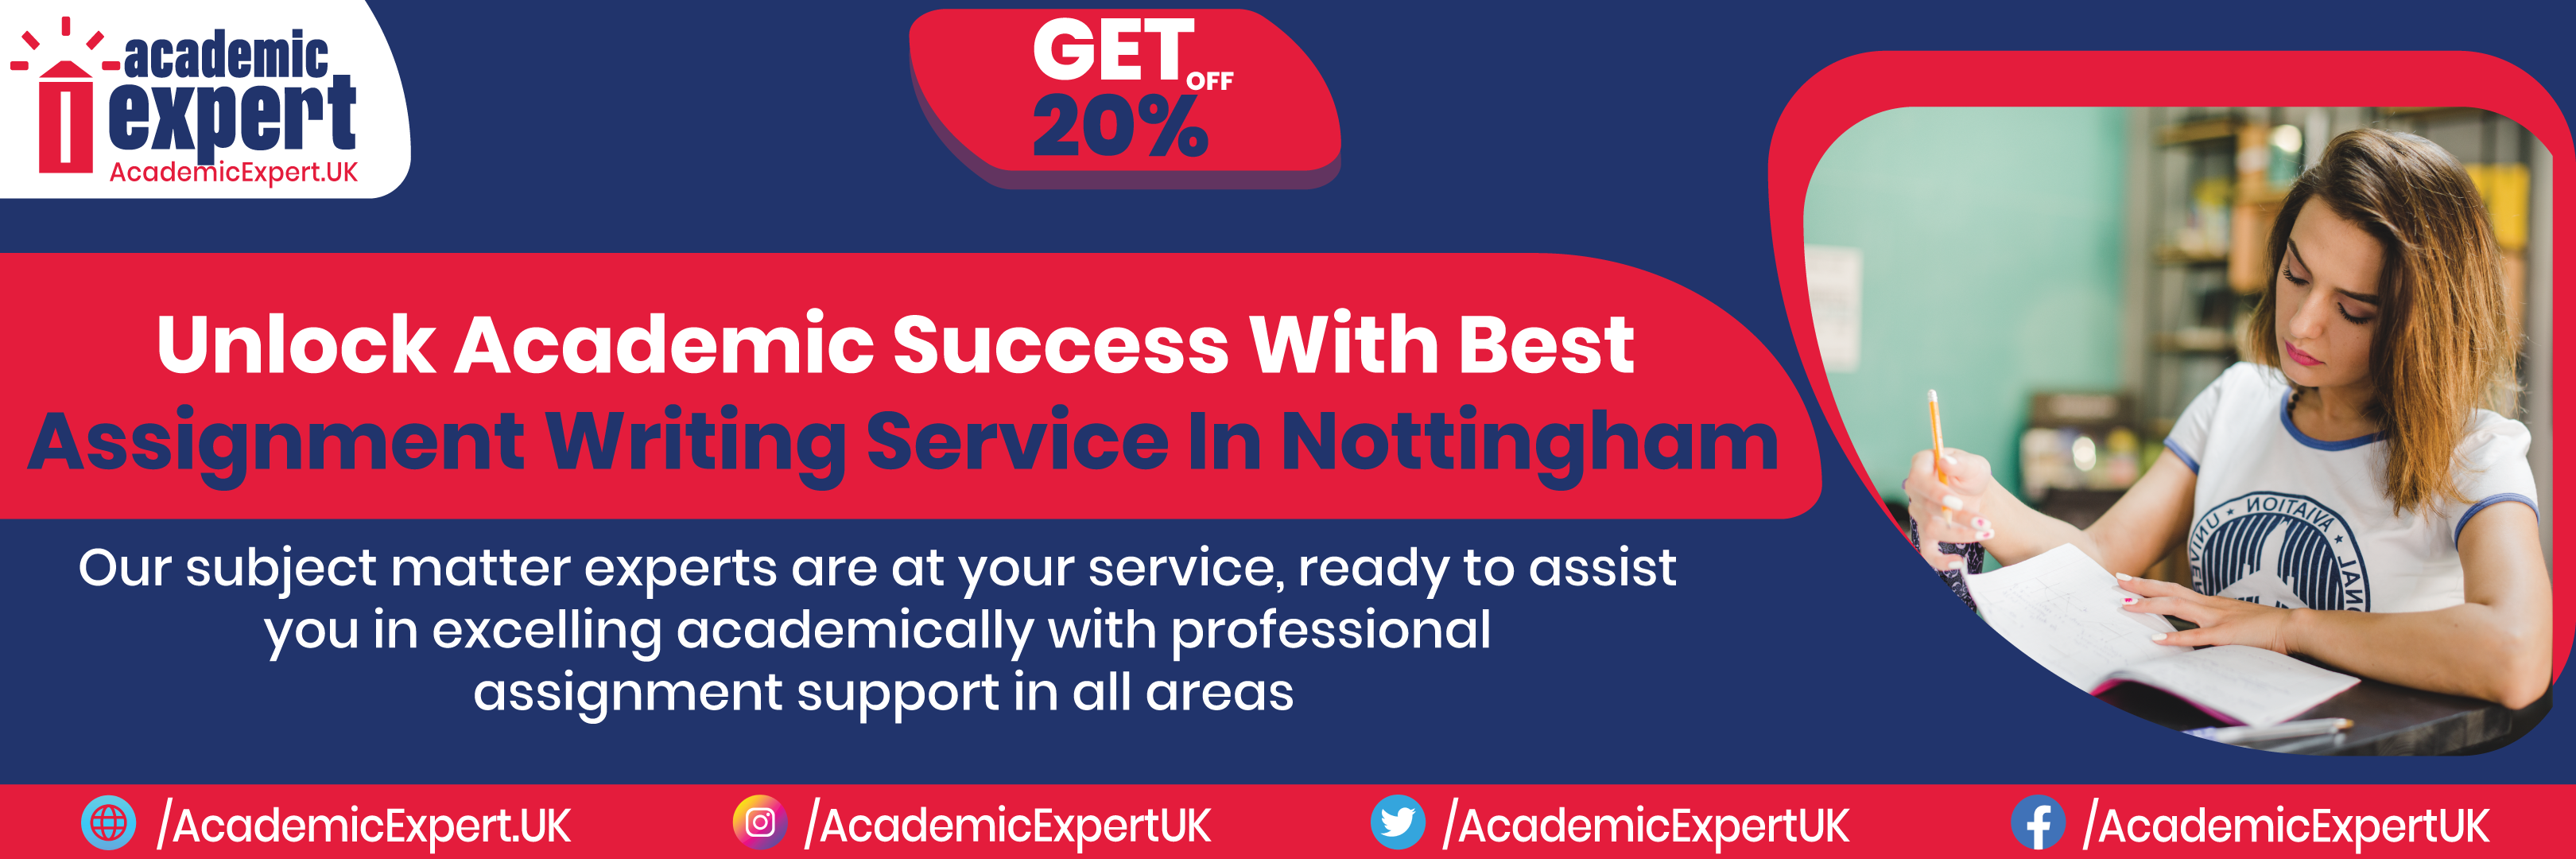 Unlock Academic Success With Best Assignment Writing Service In Nottingham